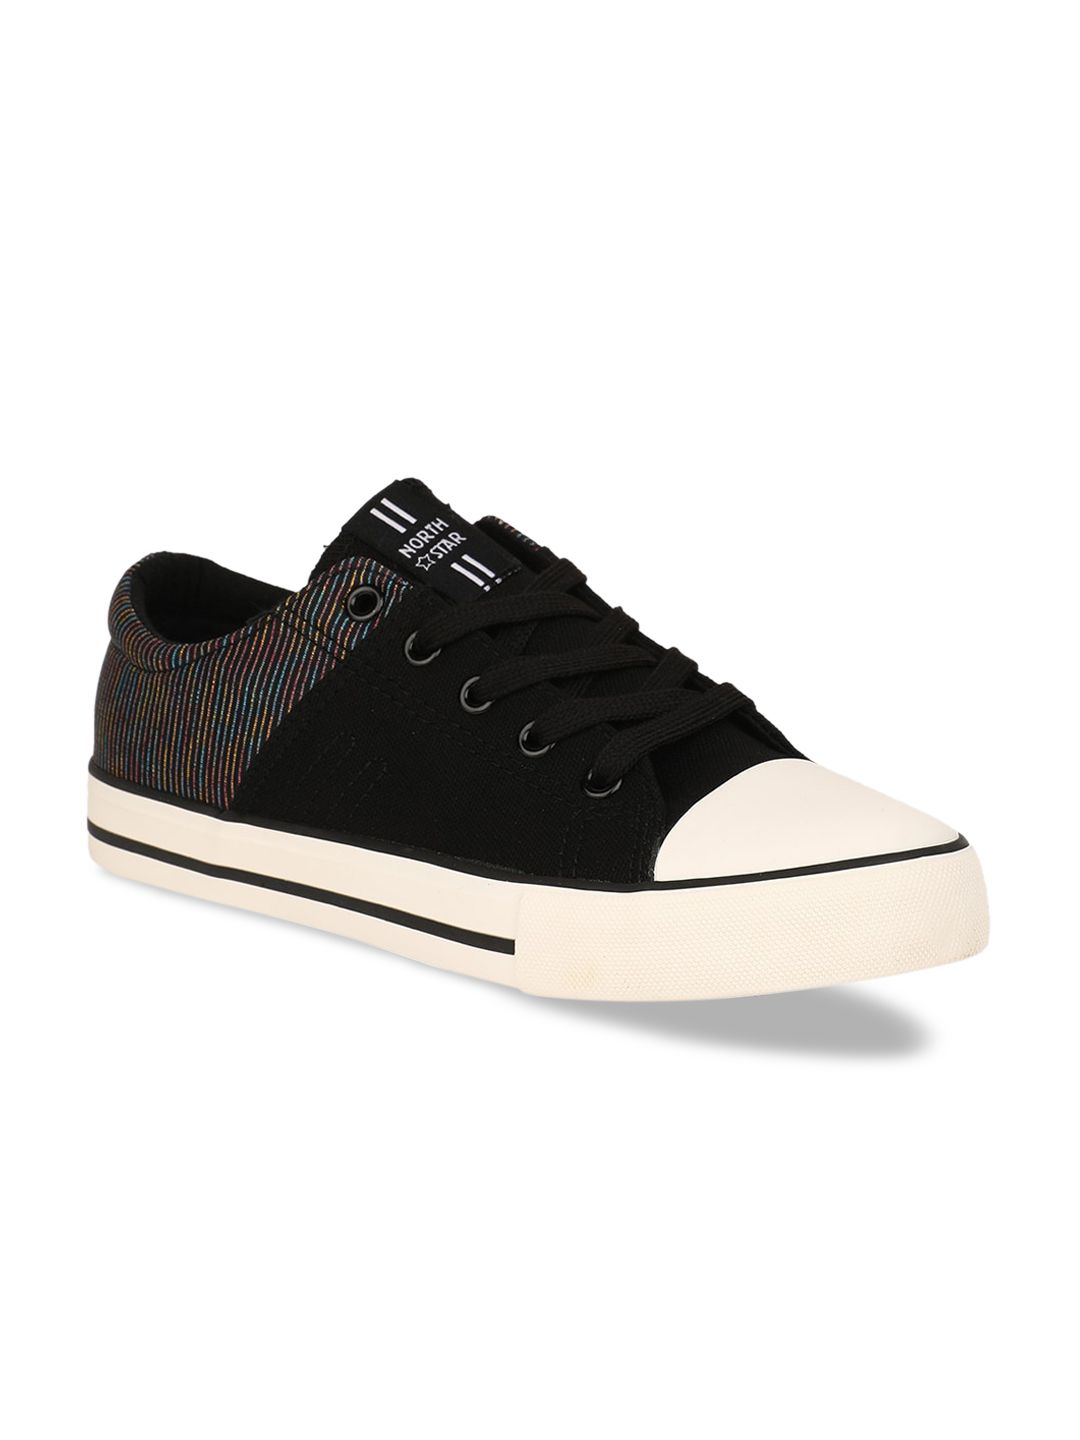 North Star Women Black Sneakers Price in India